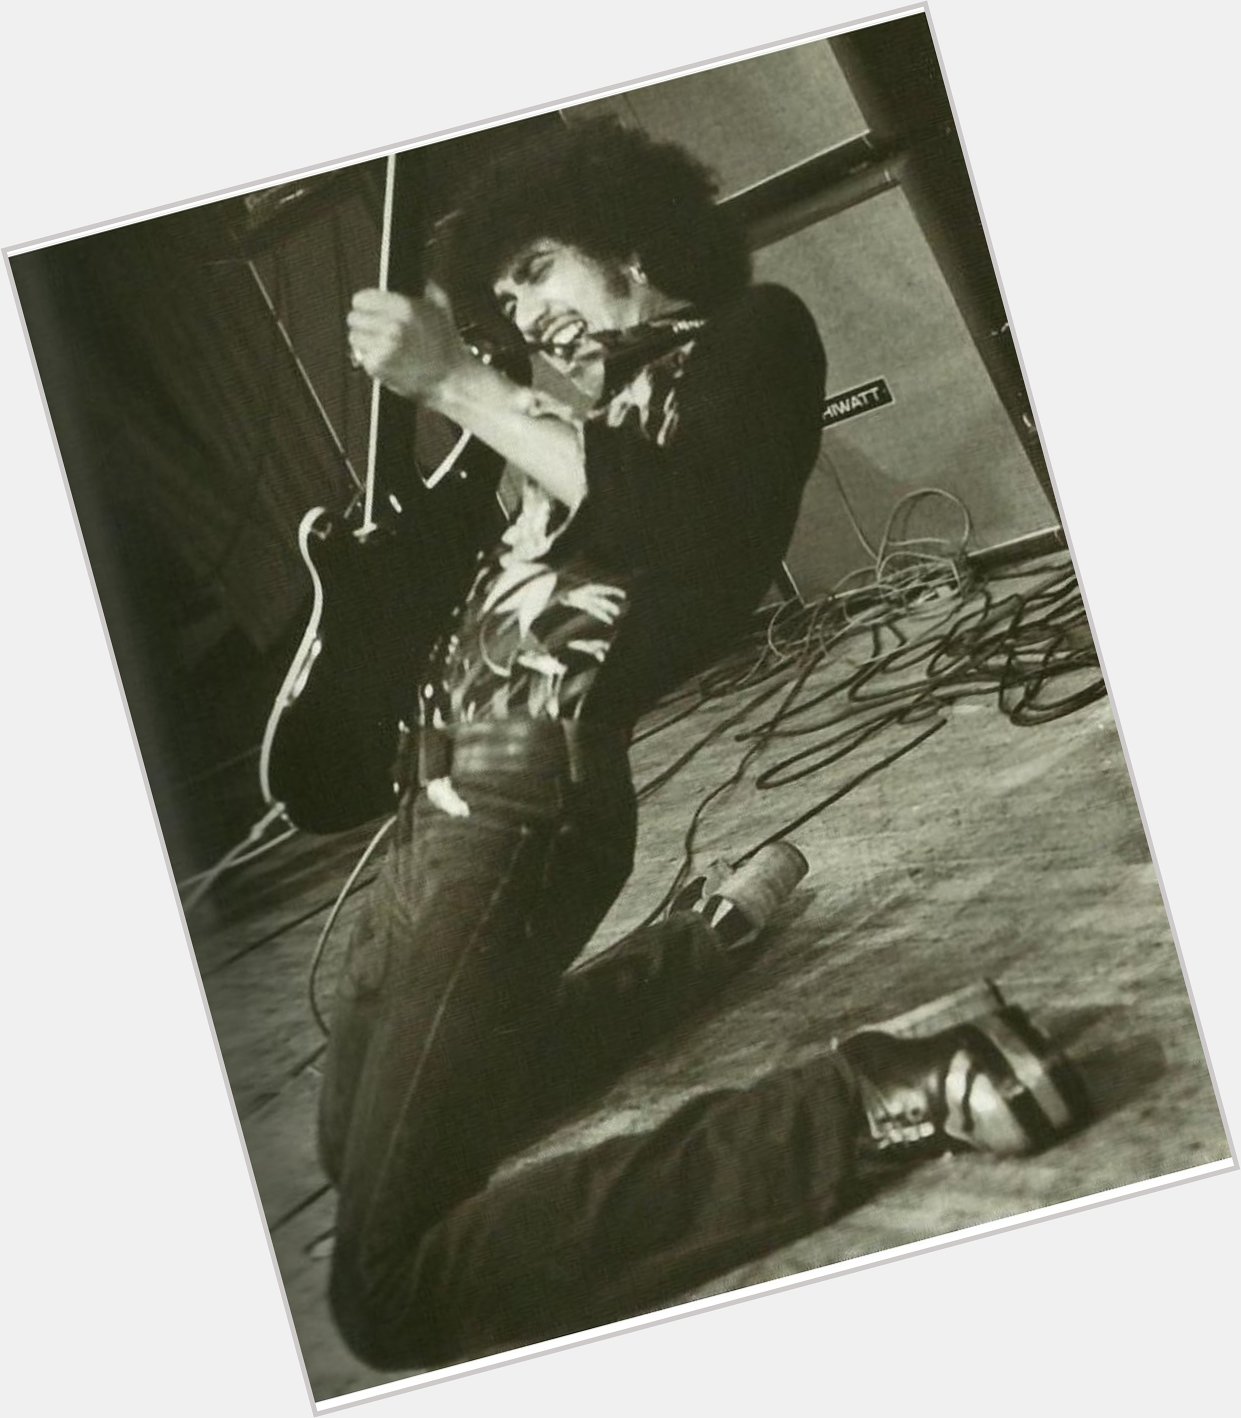 Happy birthday to the late great Phil Lynott!  